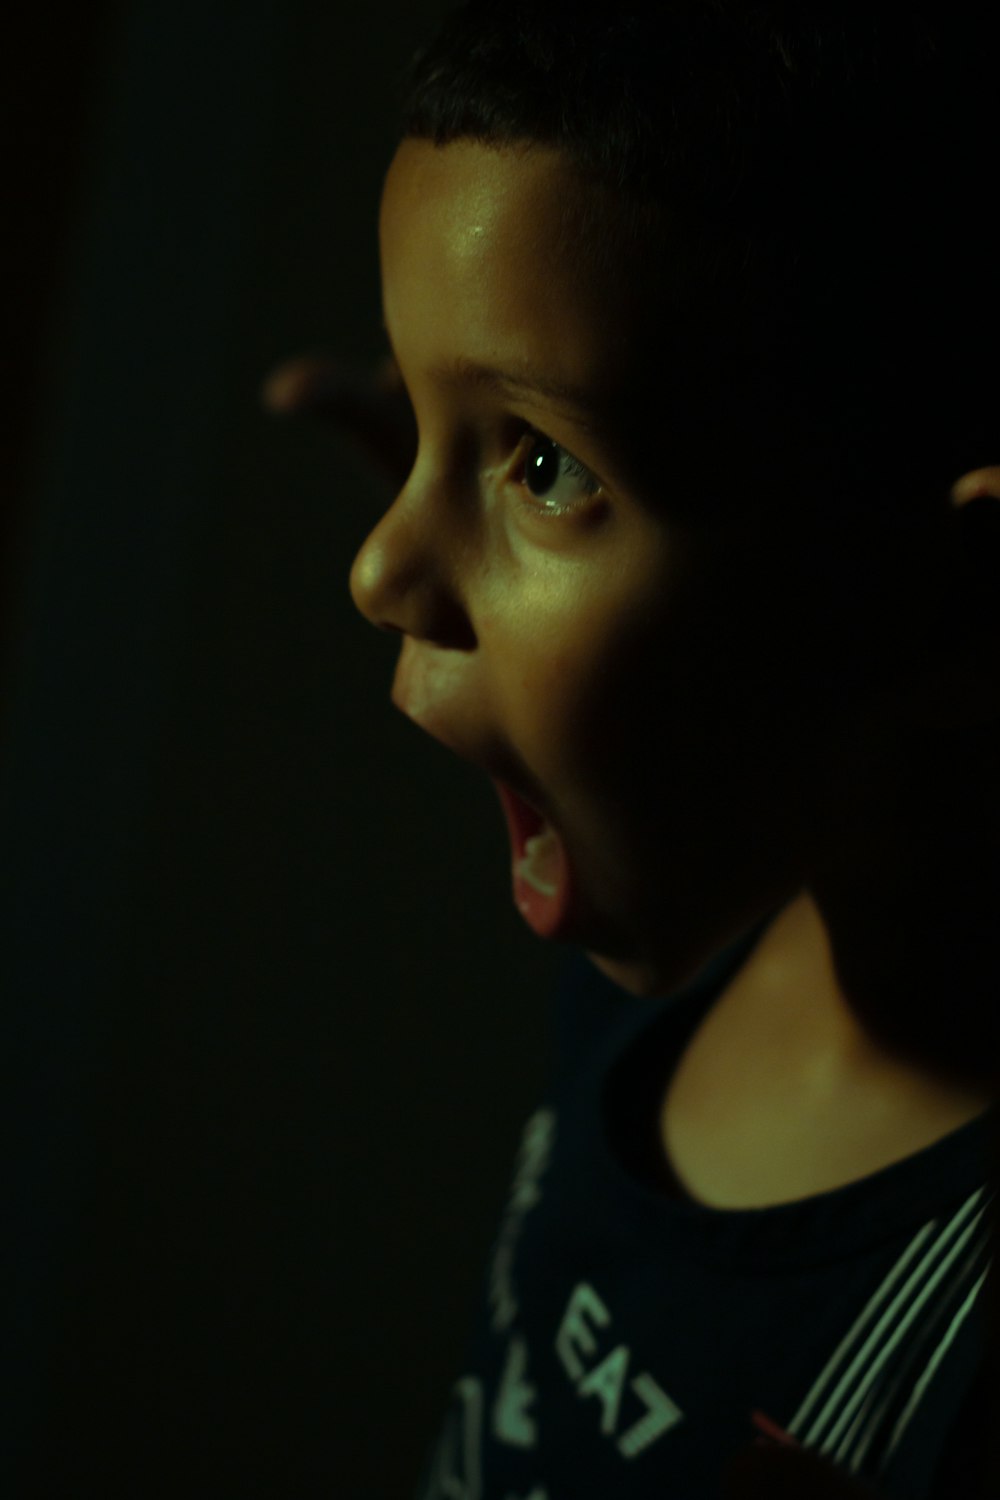 a young boy with his mouth open in the dark